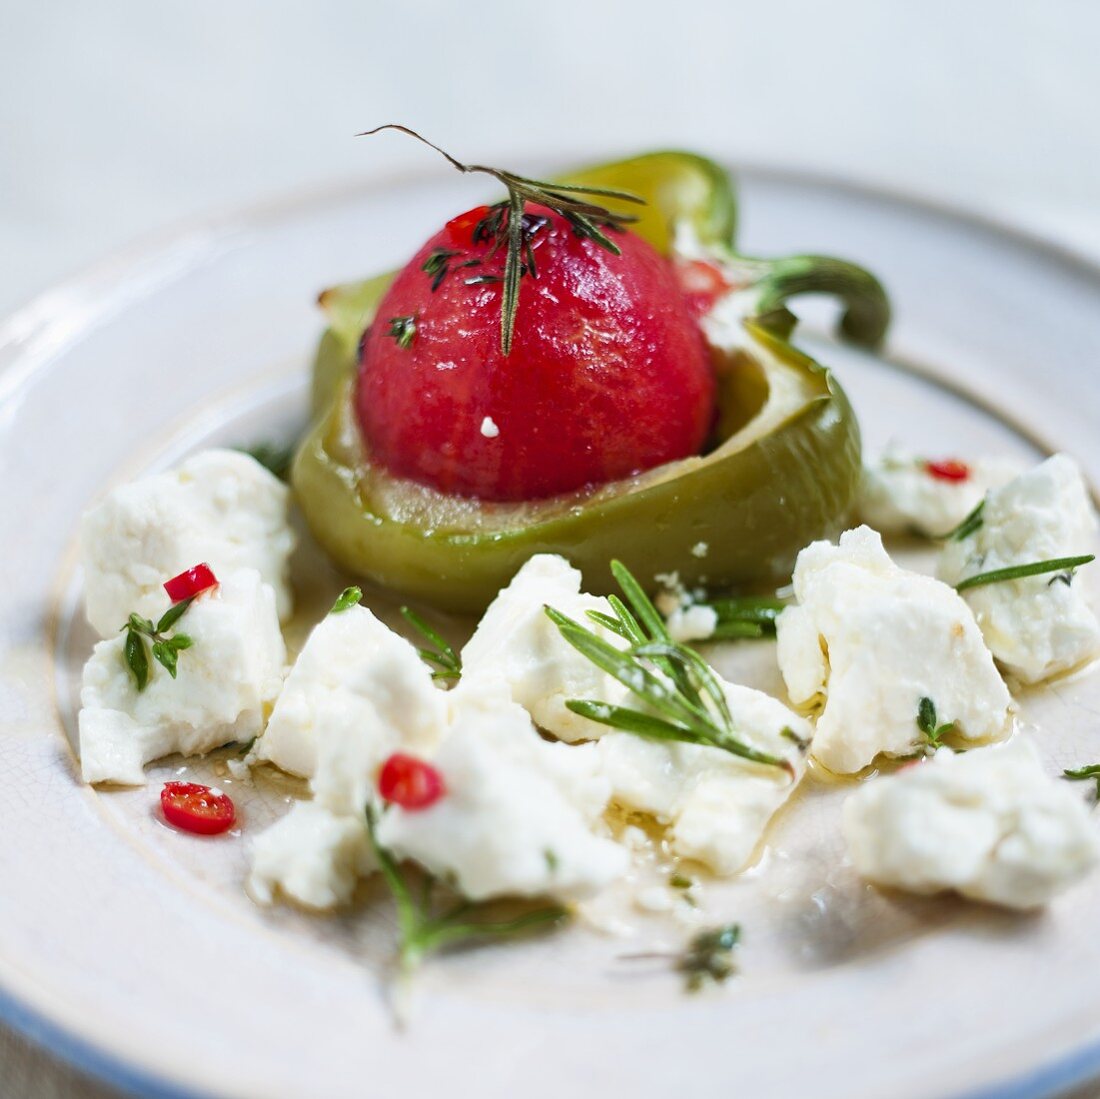 Green pepper stuffed with tomato, with feta cheese